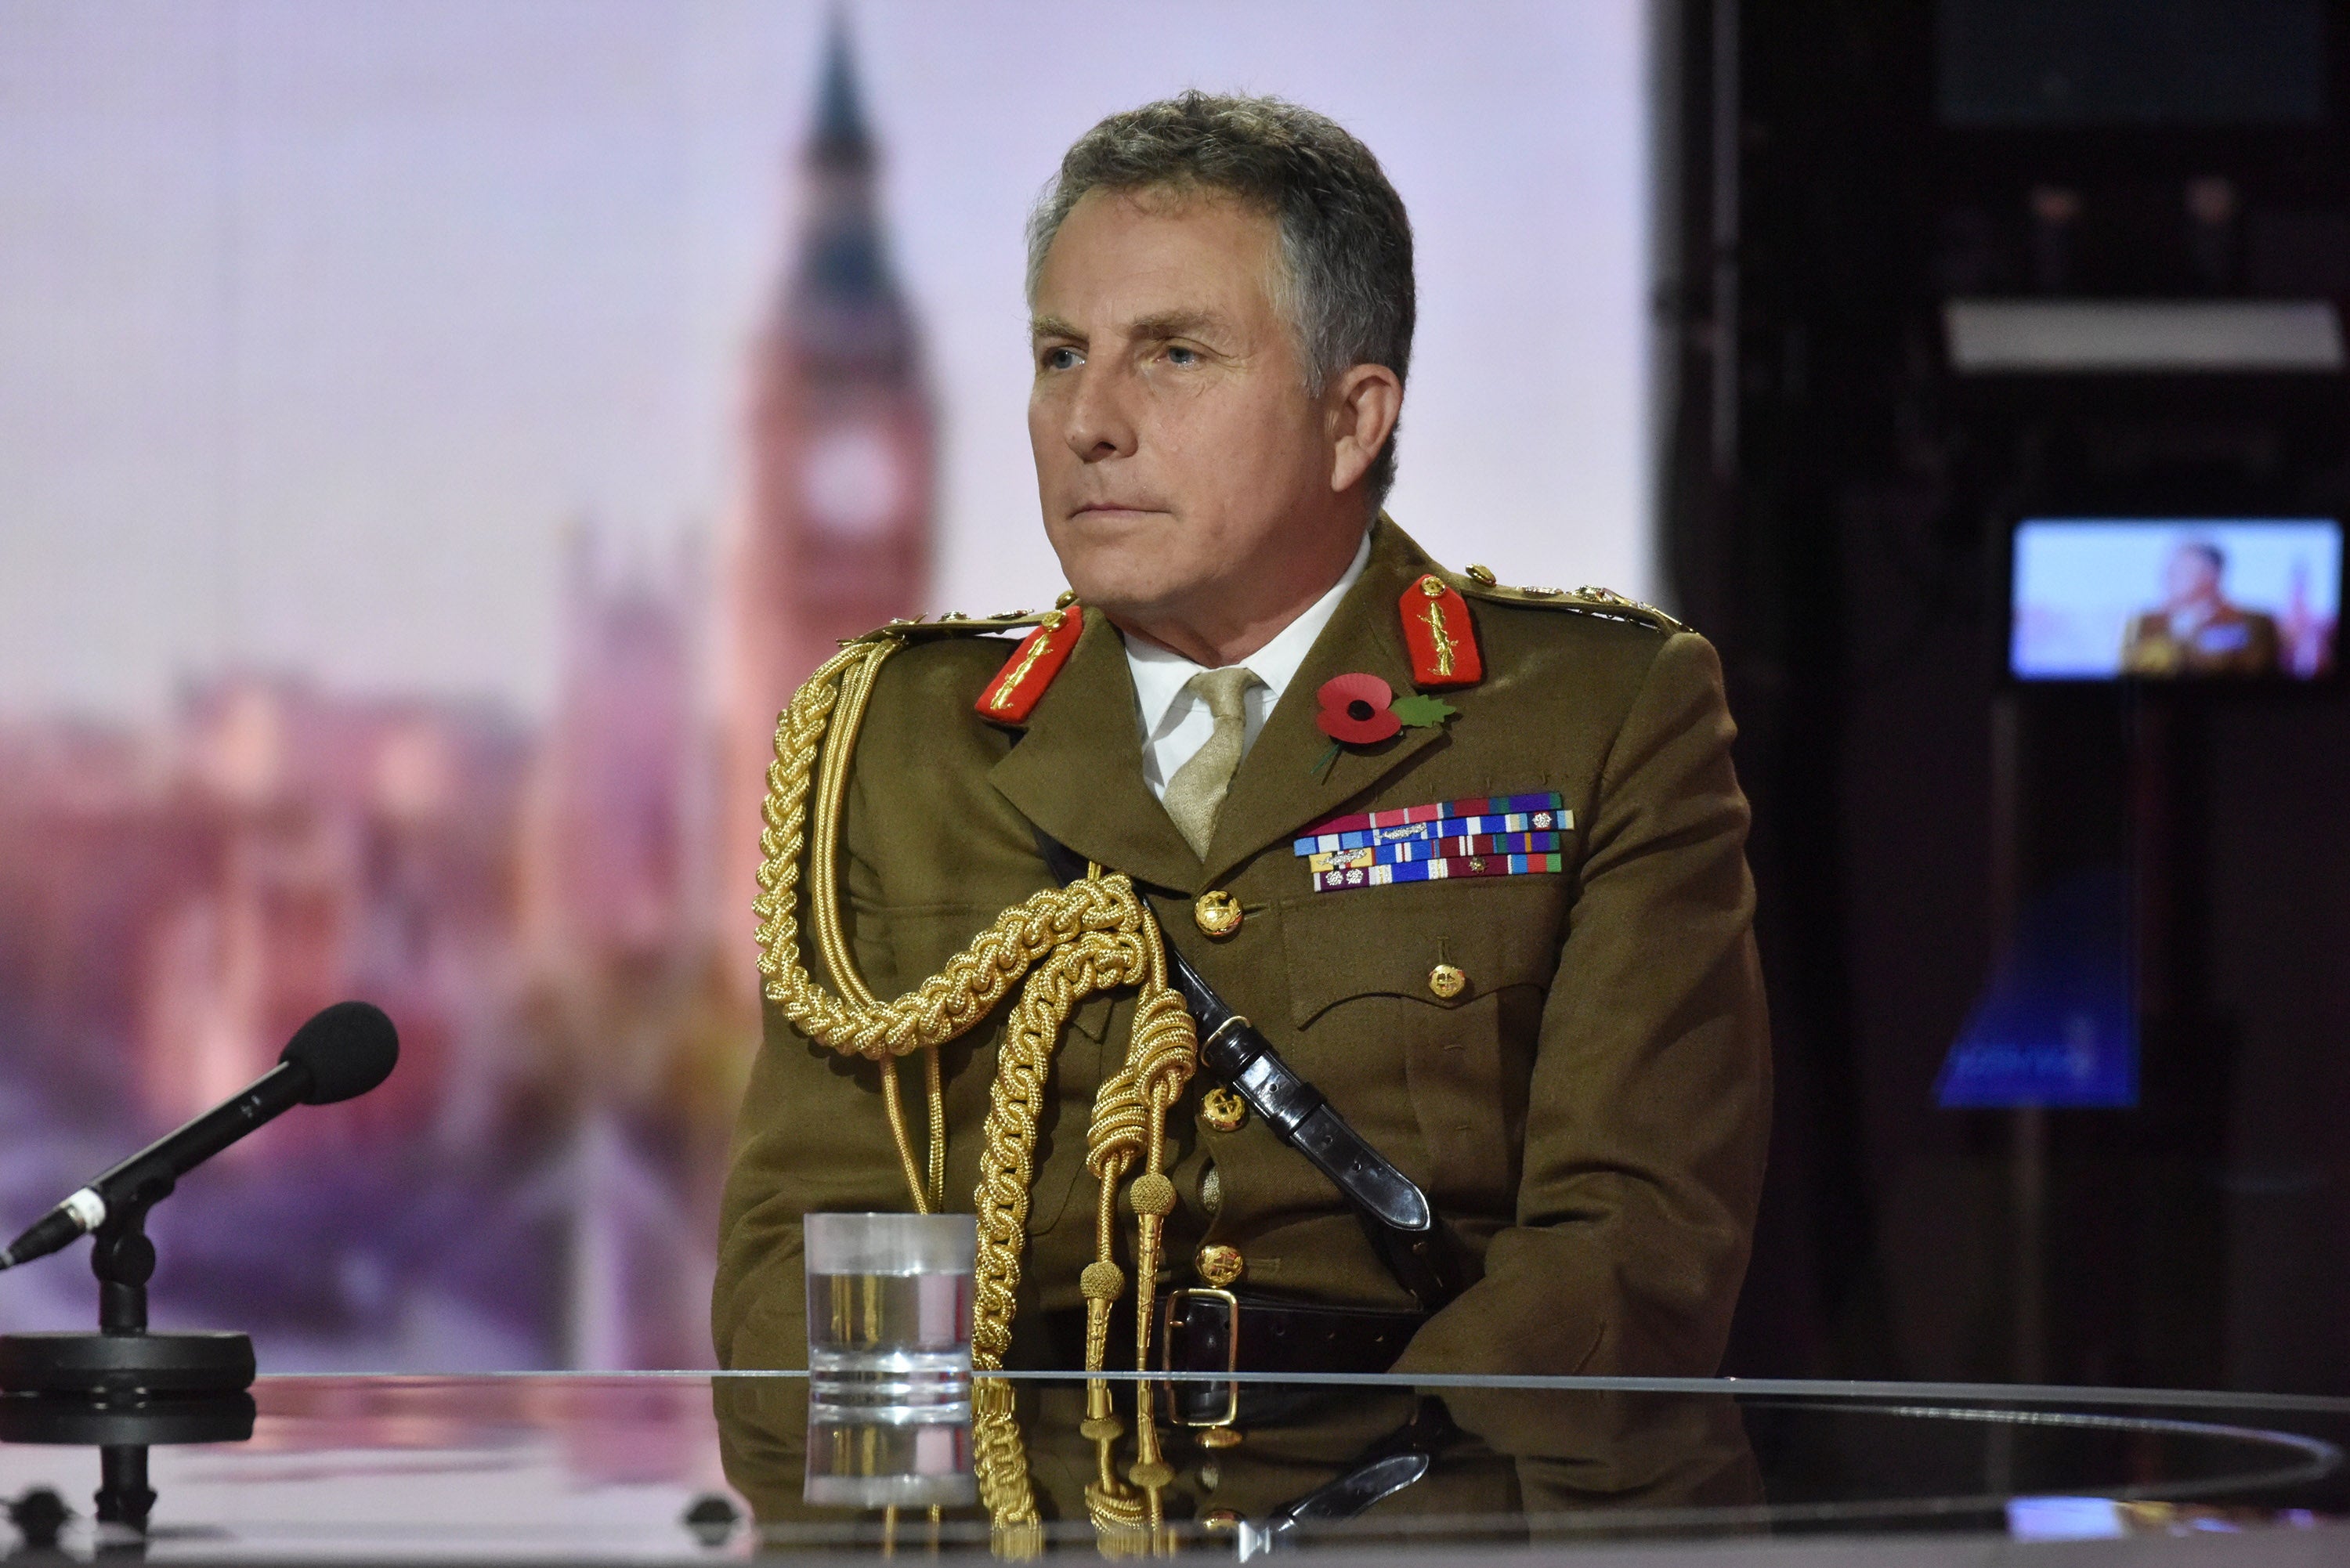 Chief of the defence staff General Sir Nick Carter